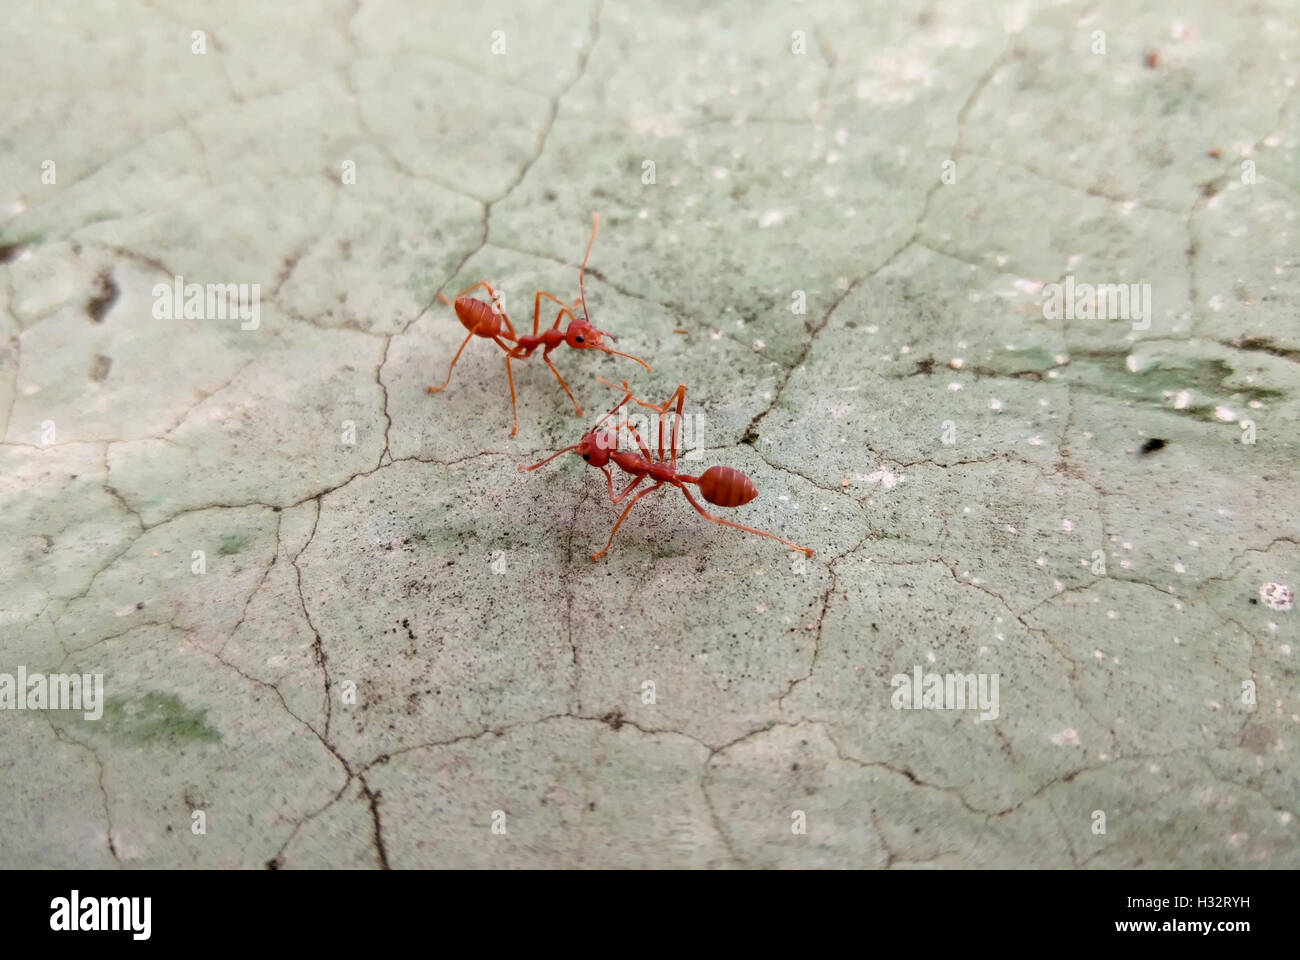 closeup shot of two red ants communicating on cracked and stained concrete floor Stock Photo